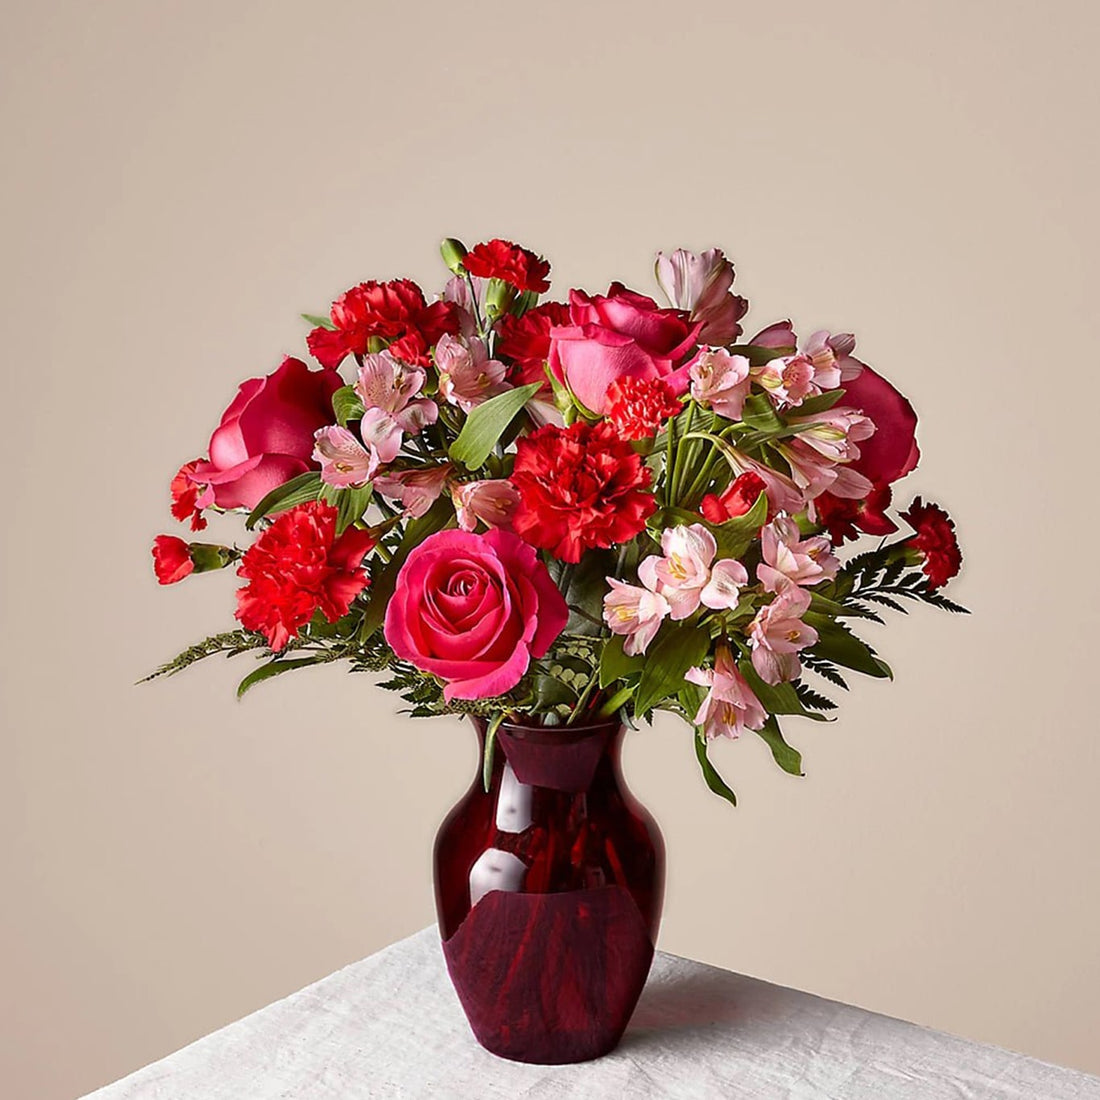 The Valentine Bouquet, Two colours of roses, carnations and more flowers make a bold statement of your love for Valentine&